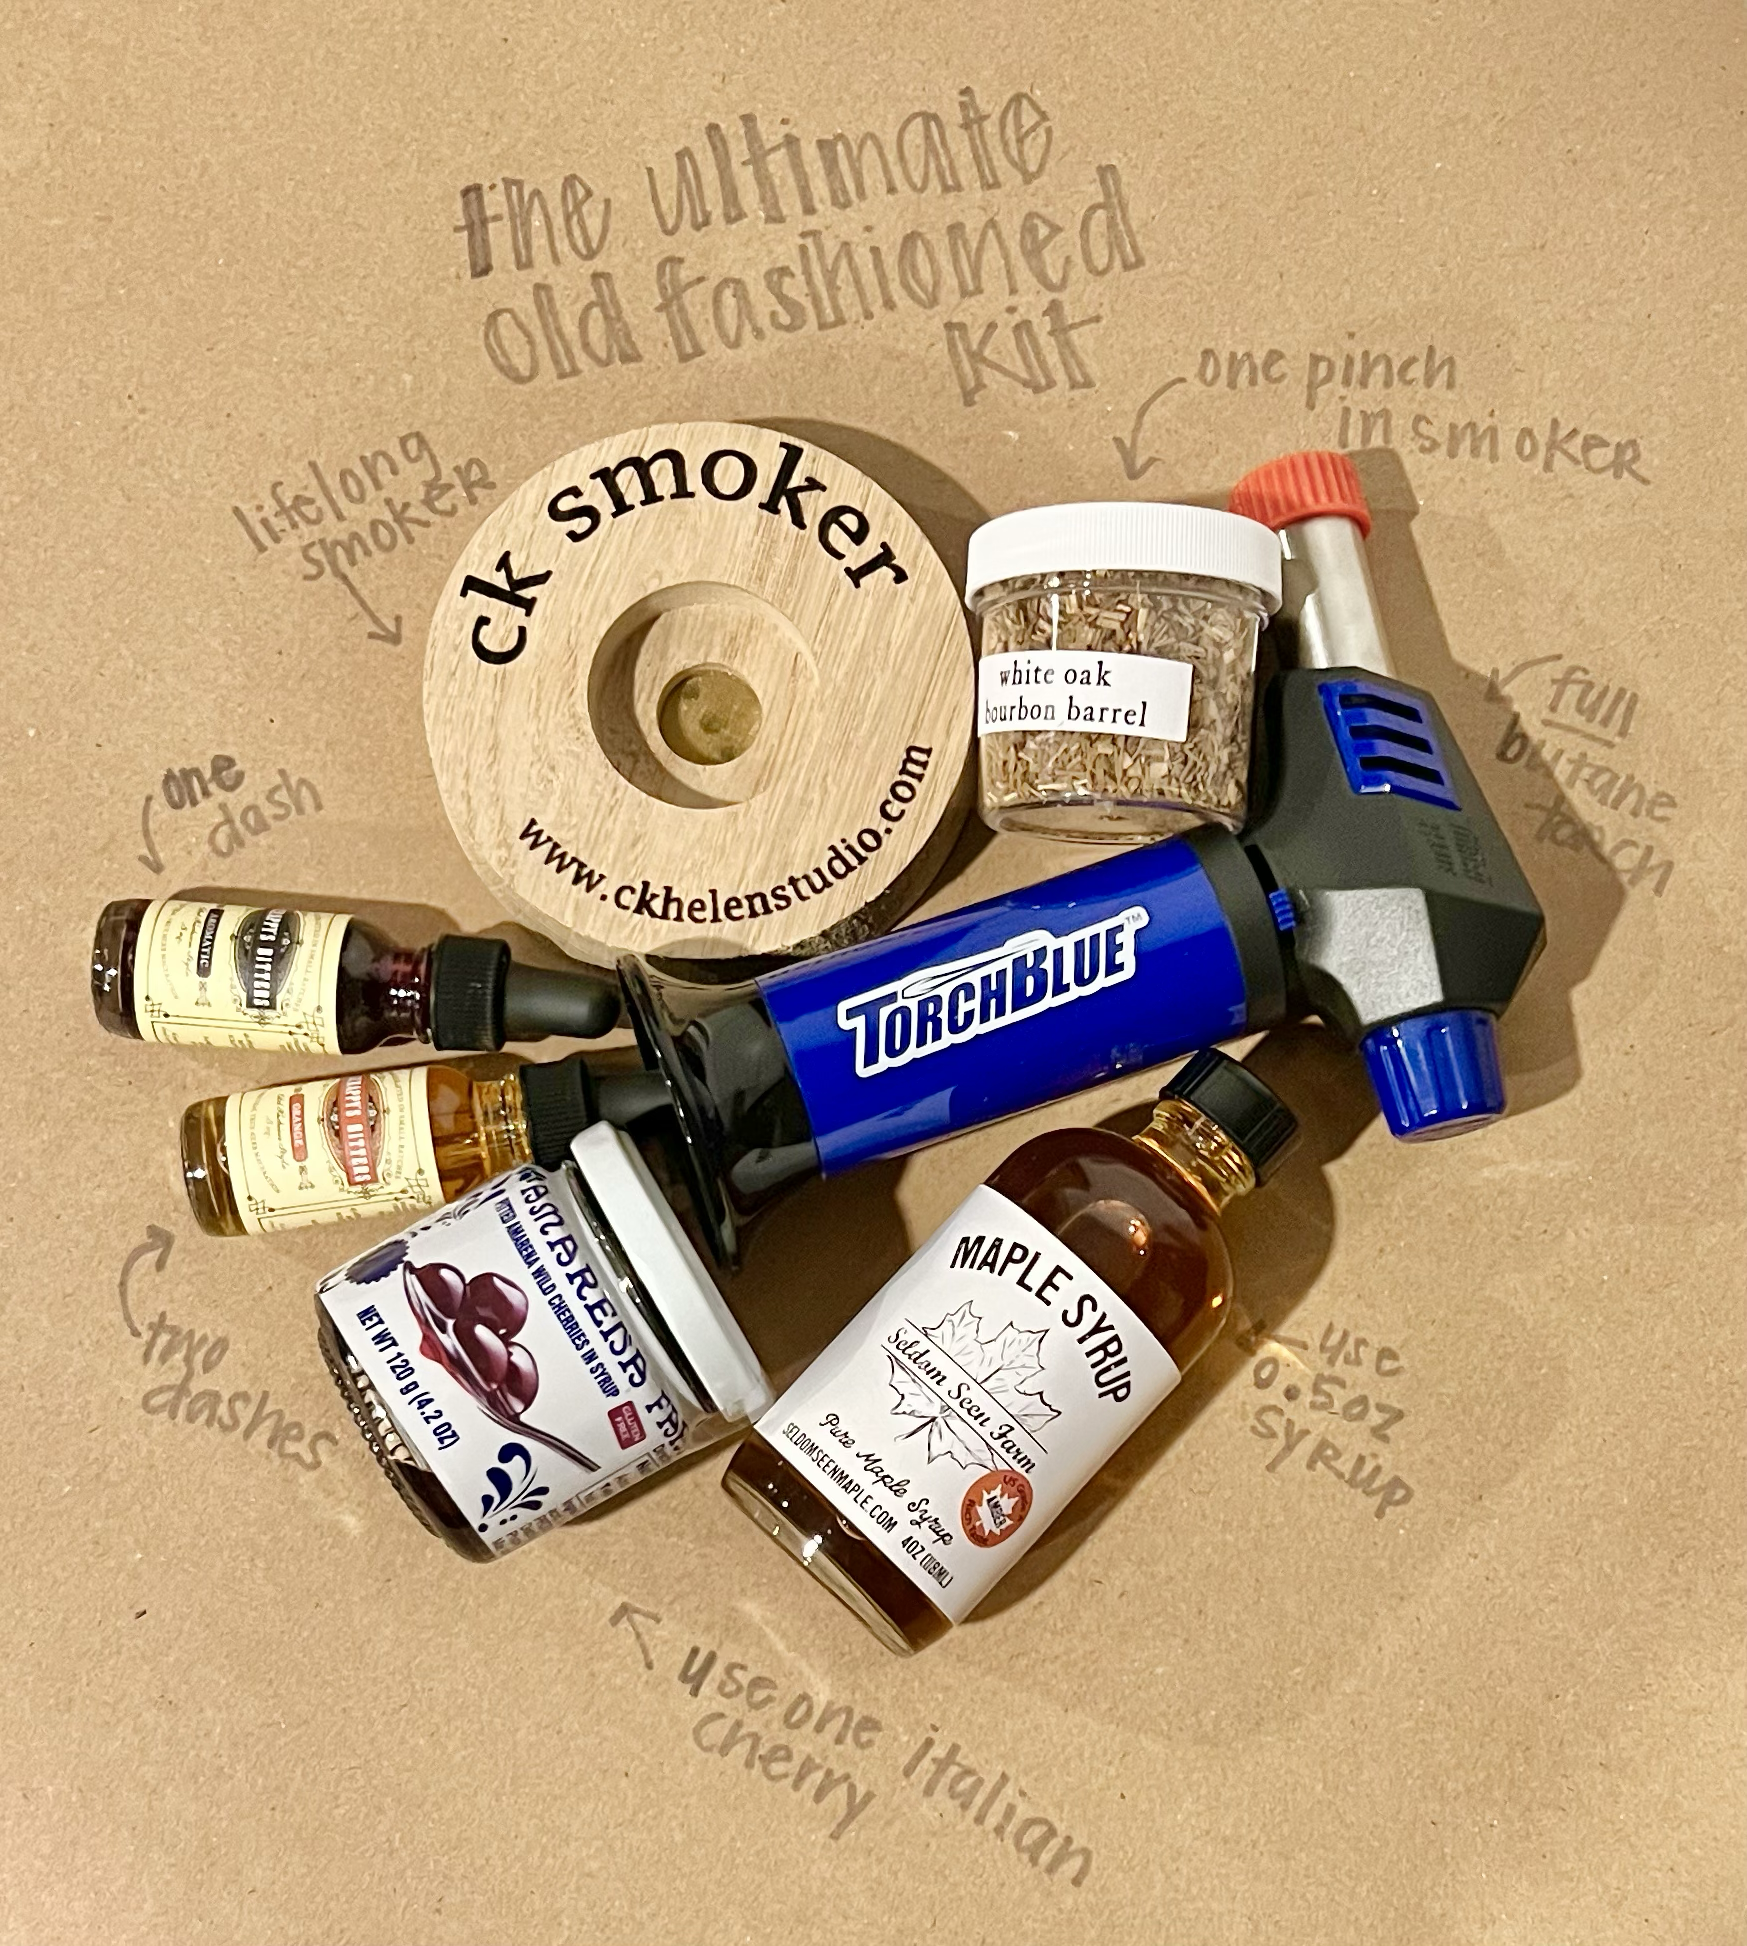 The Ultimate Old Fashioned Cocktail Kit